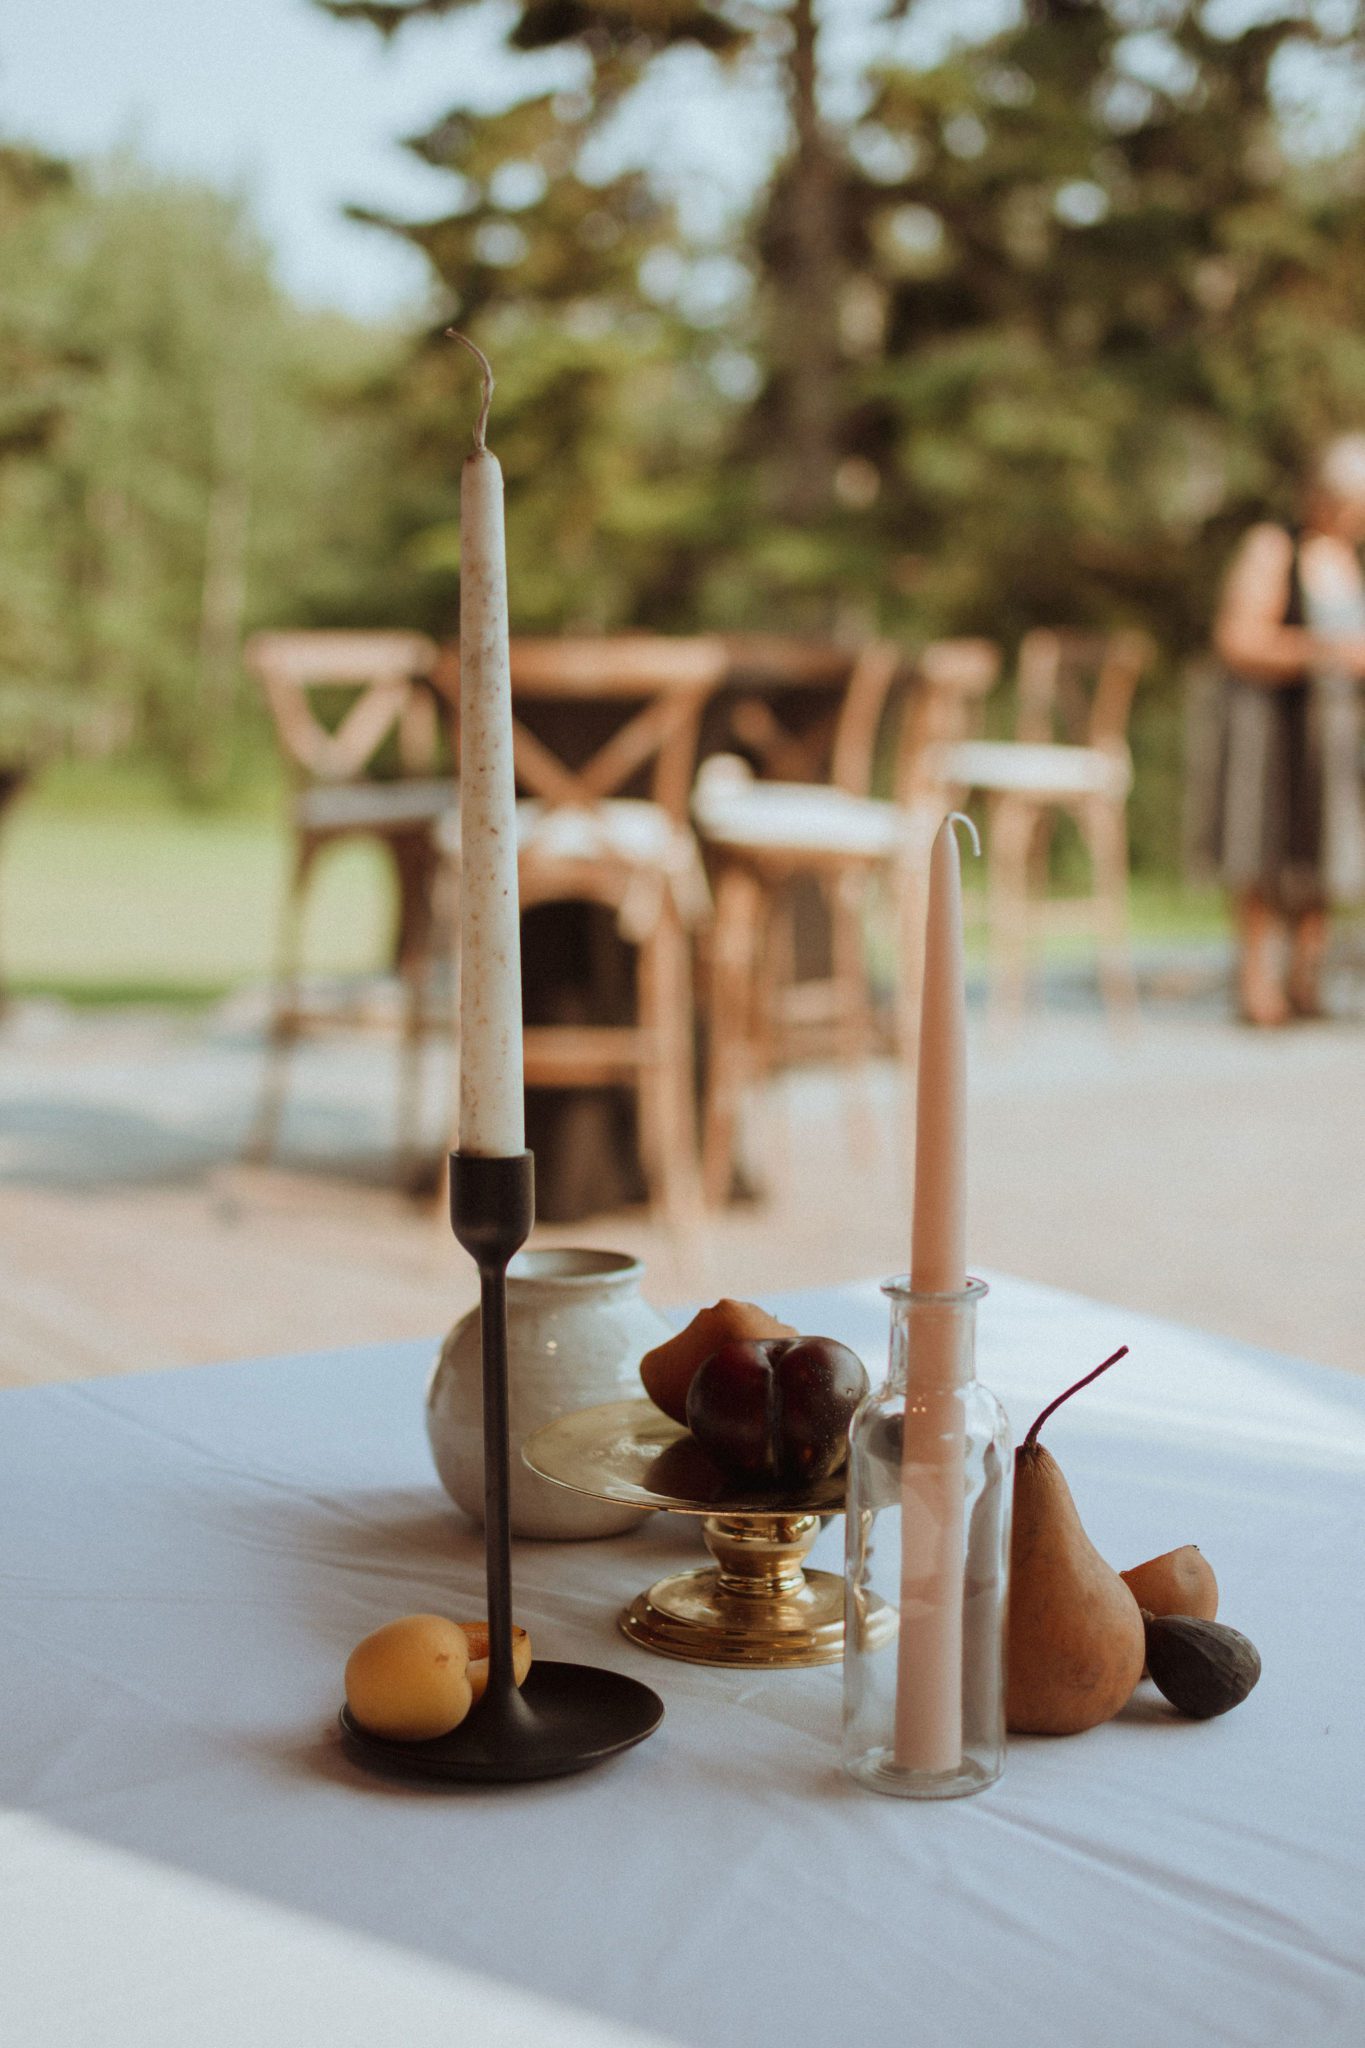 Curated cottage core aesthetic at this outdoor summer wedding, unique wedding decor